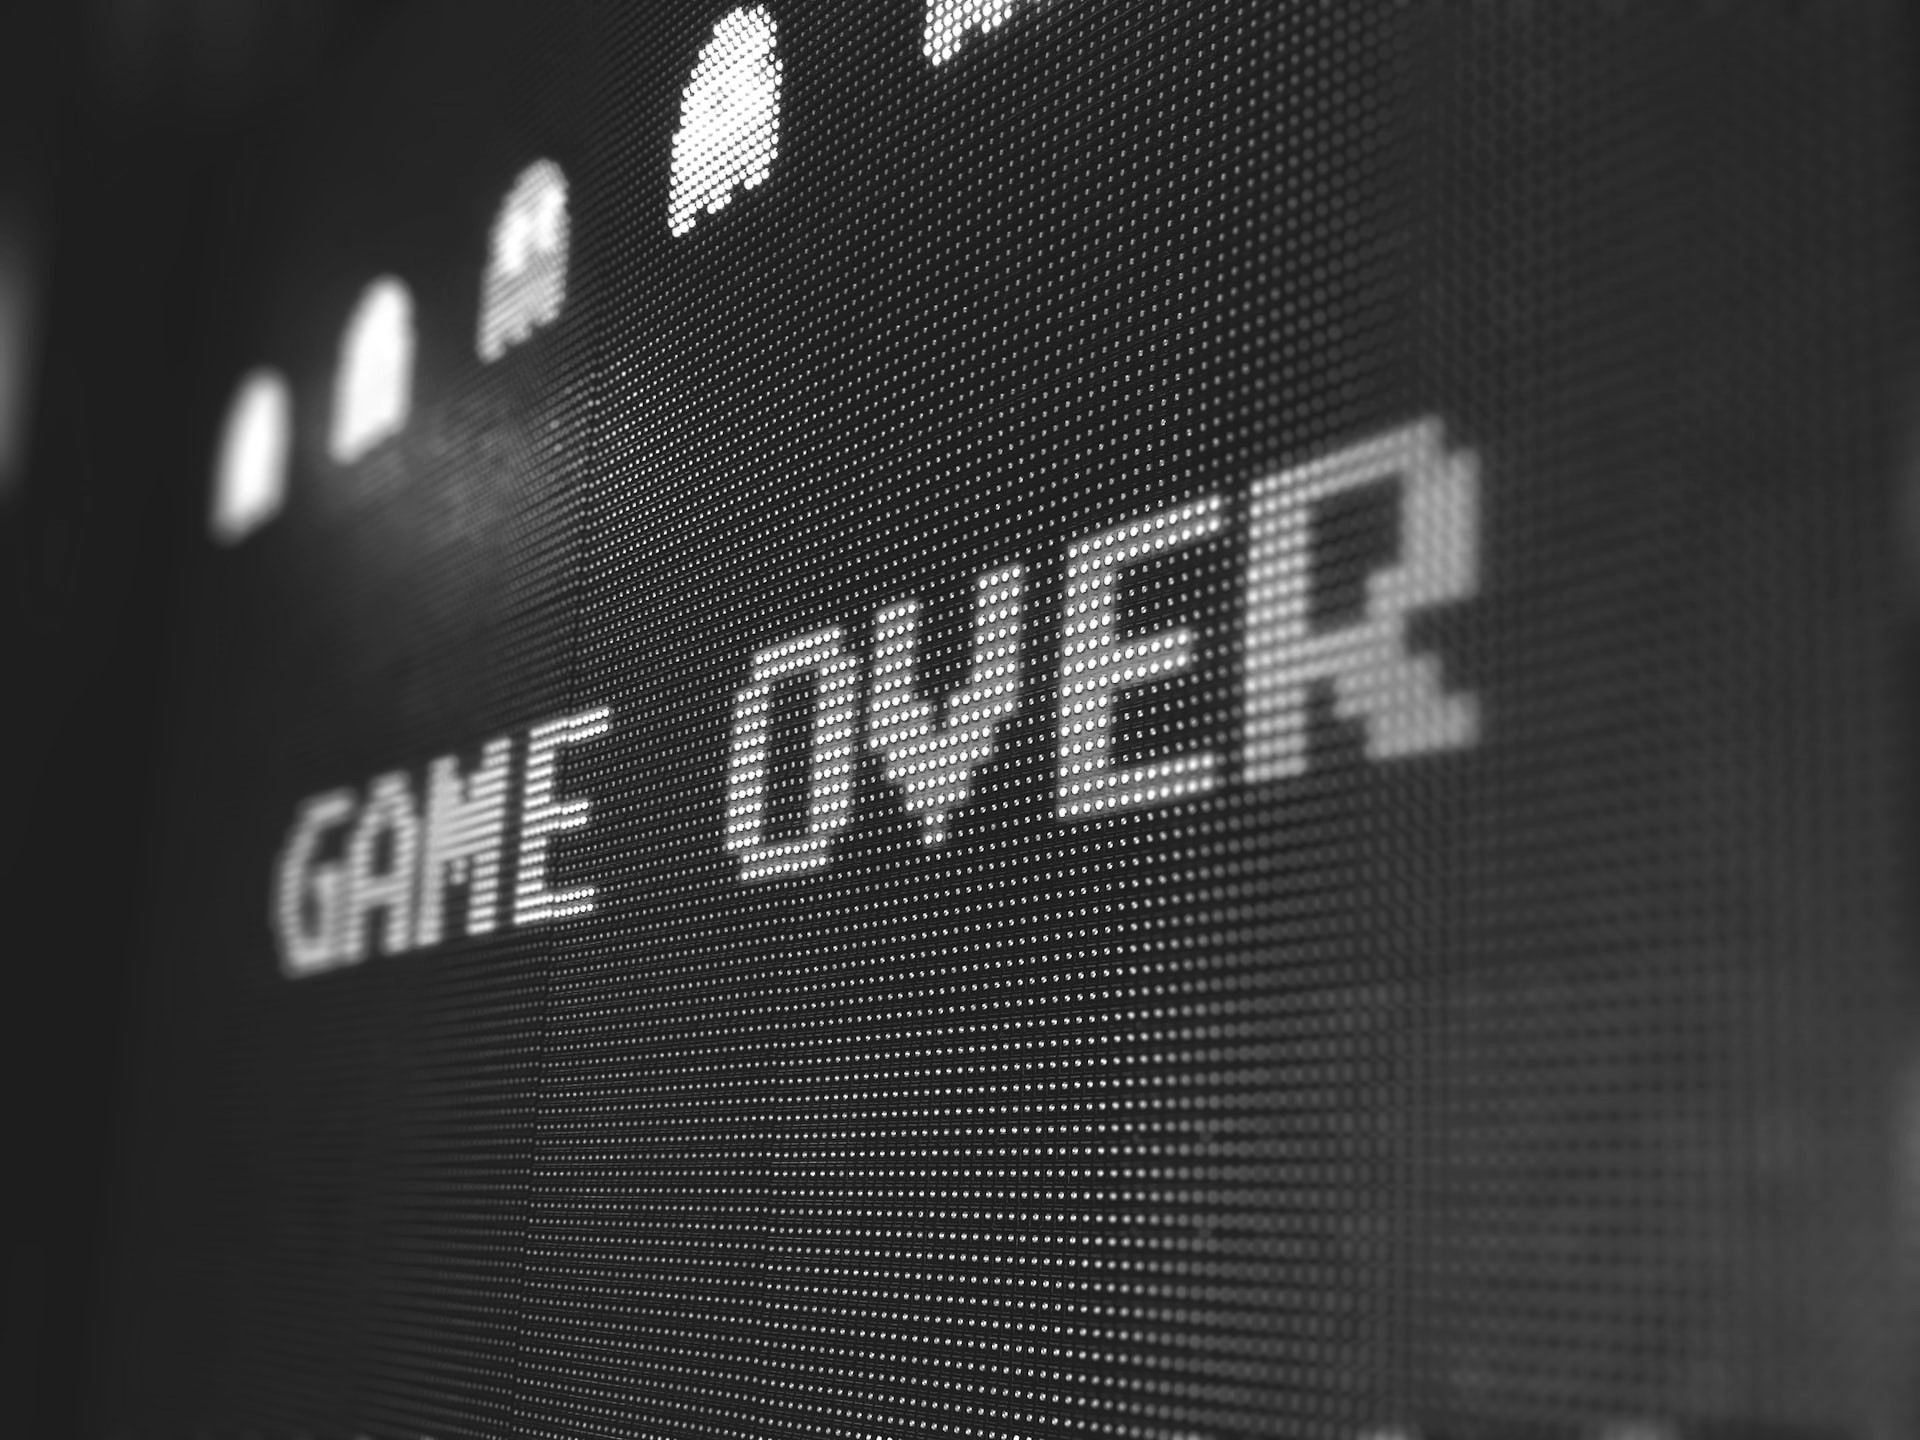 "game over" written on a digital display